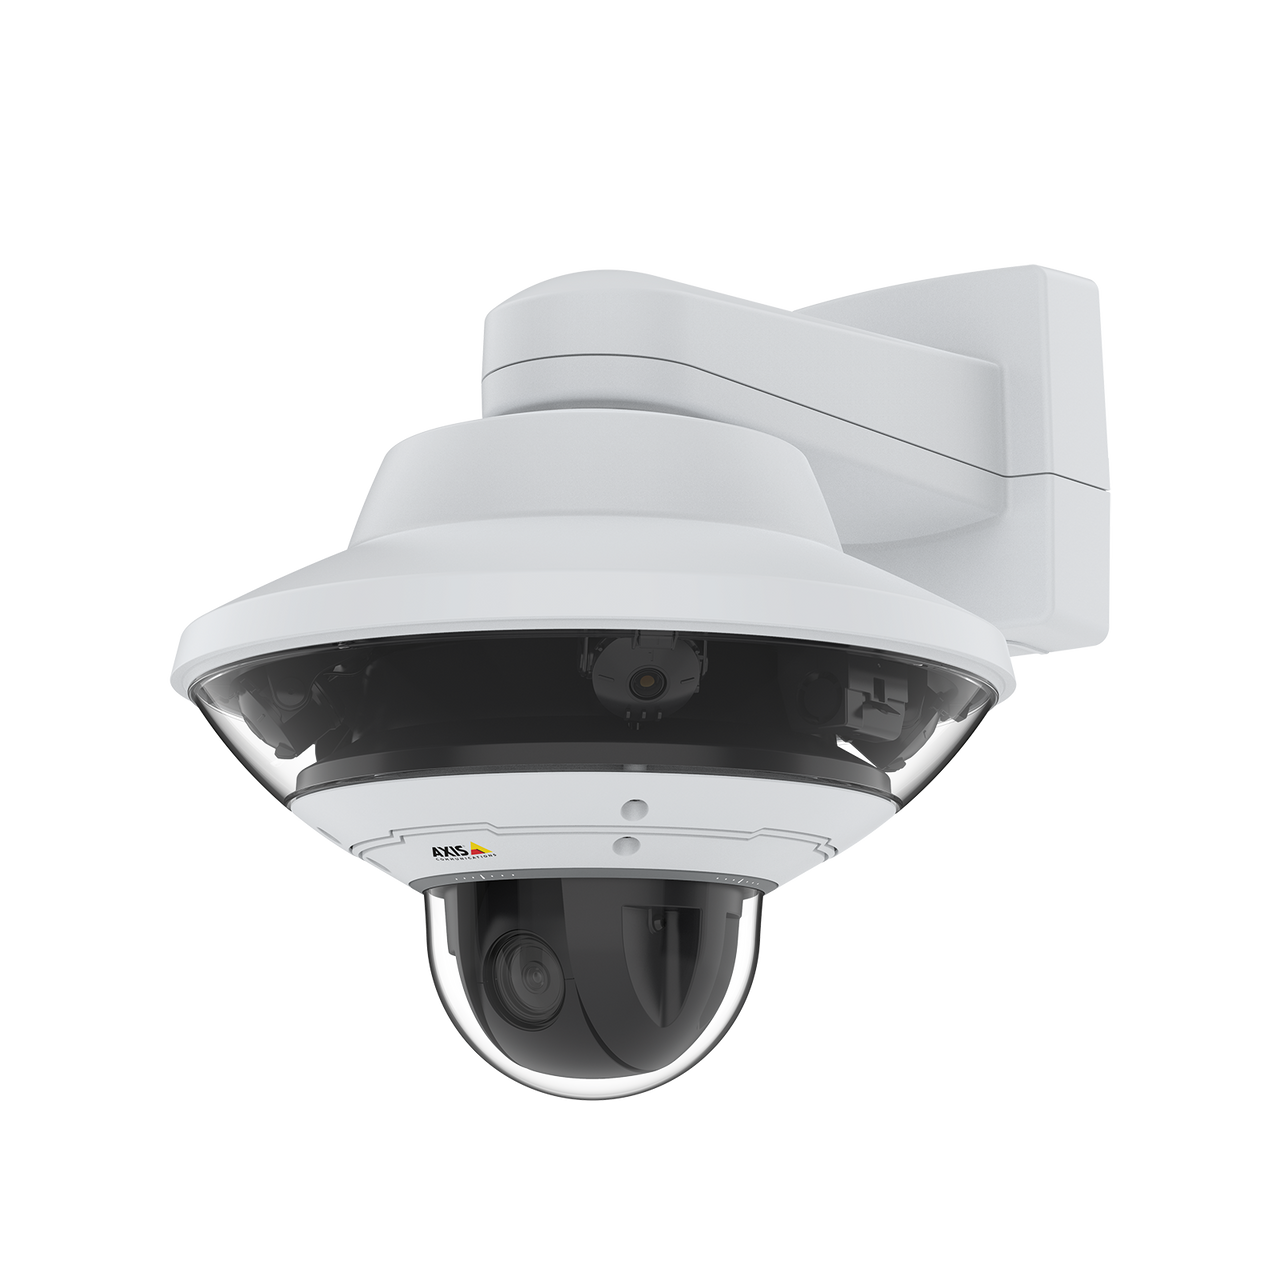 AXIS Q6010-E 60HZ For 360° real-time monitoring and great detail